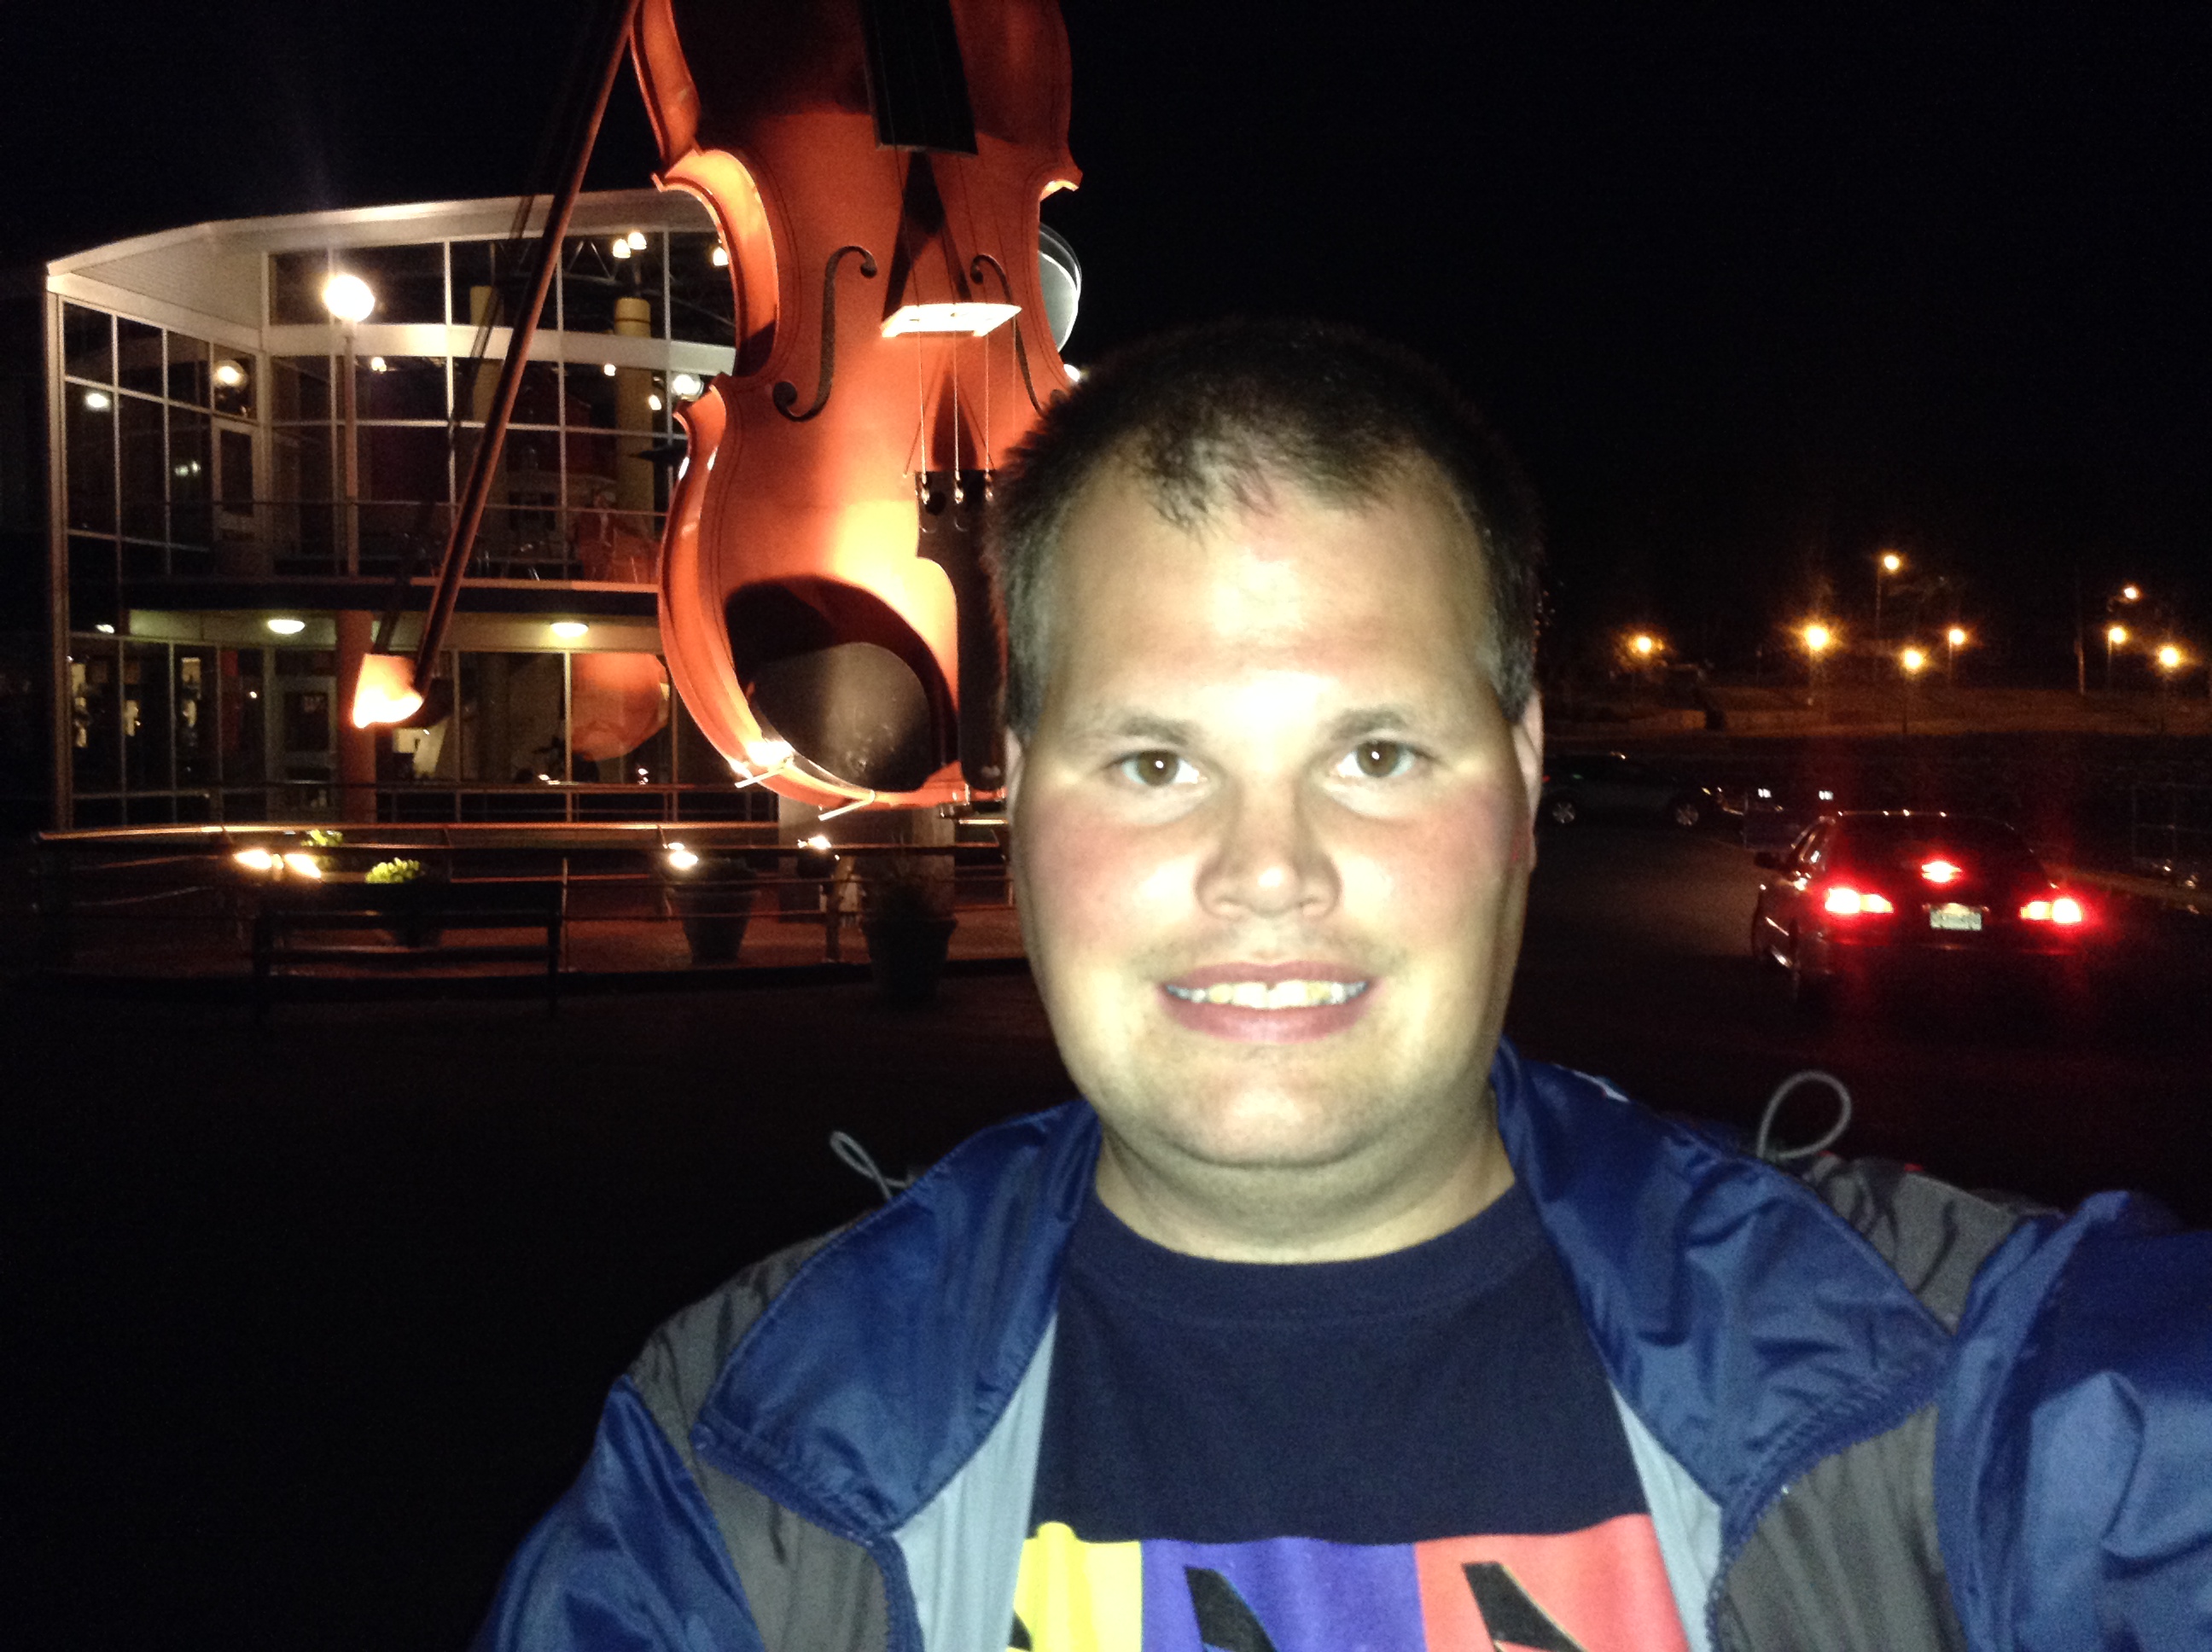 Frankie MacDonald is Enjoying the Evening at the Sydney Marine Terminal aka the Government Wharf and the Days are getting Shorter.